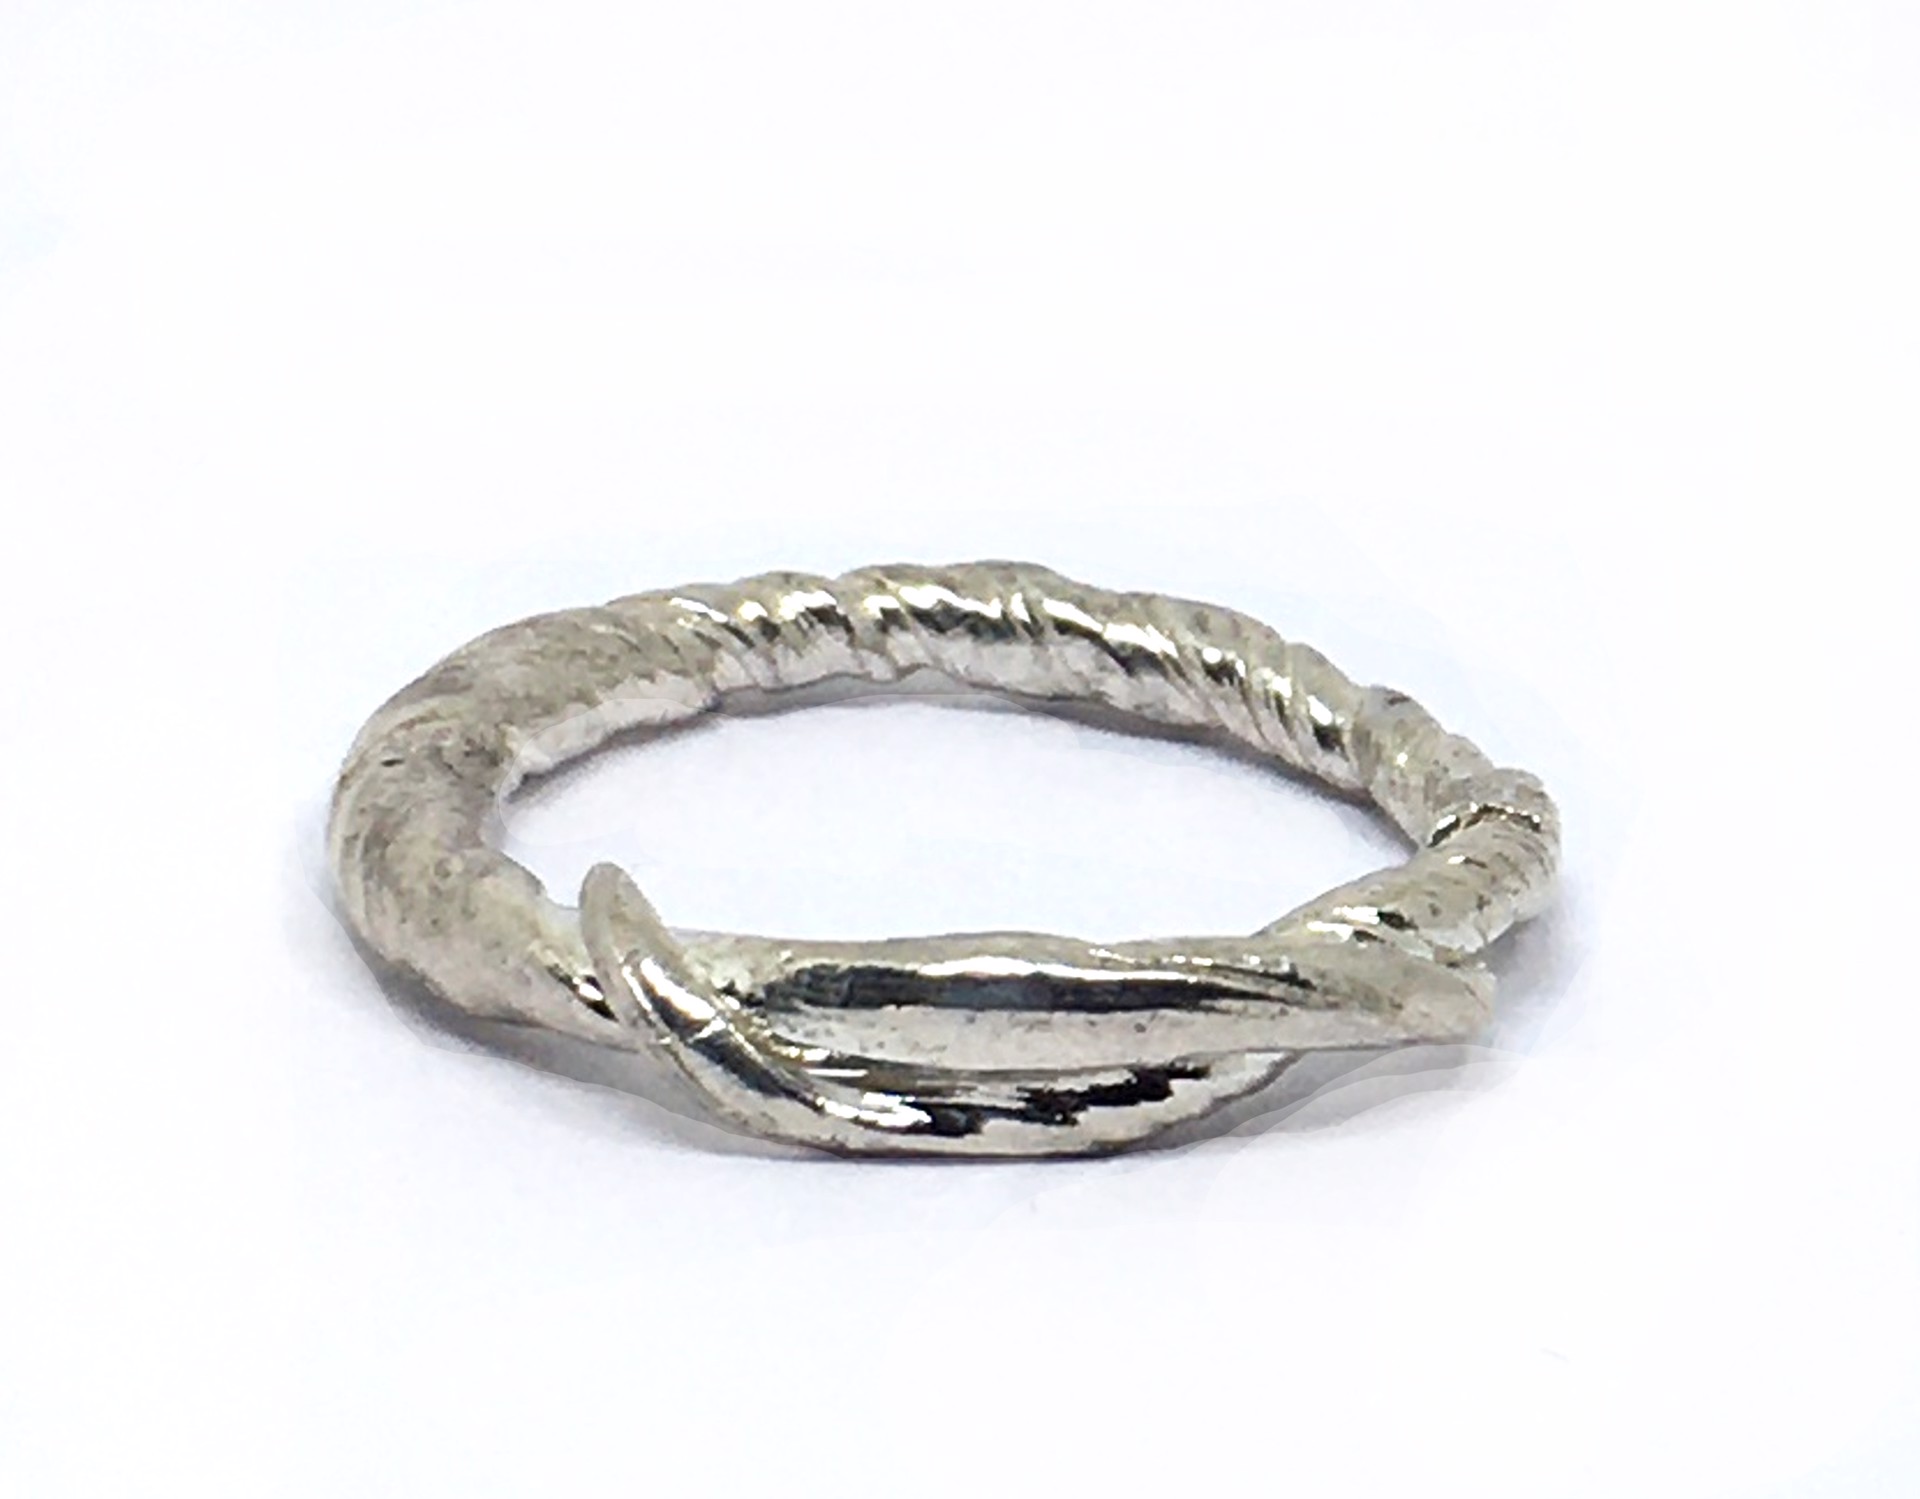 Mitsuro Hikime Twisted Skinny Vine Ring - Size 8 by Melicia Phillips